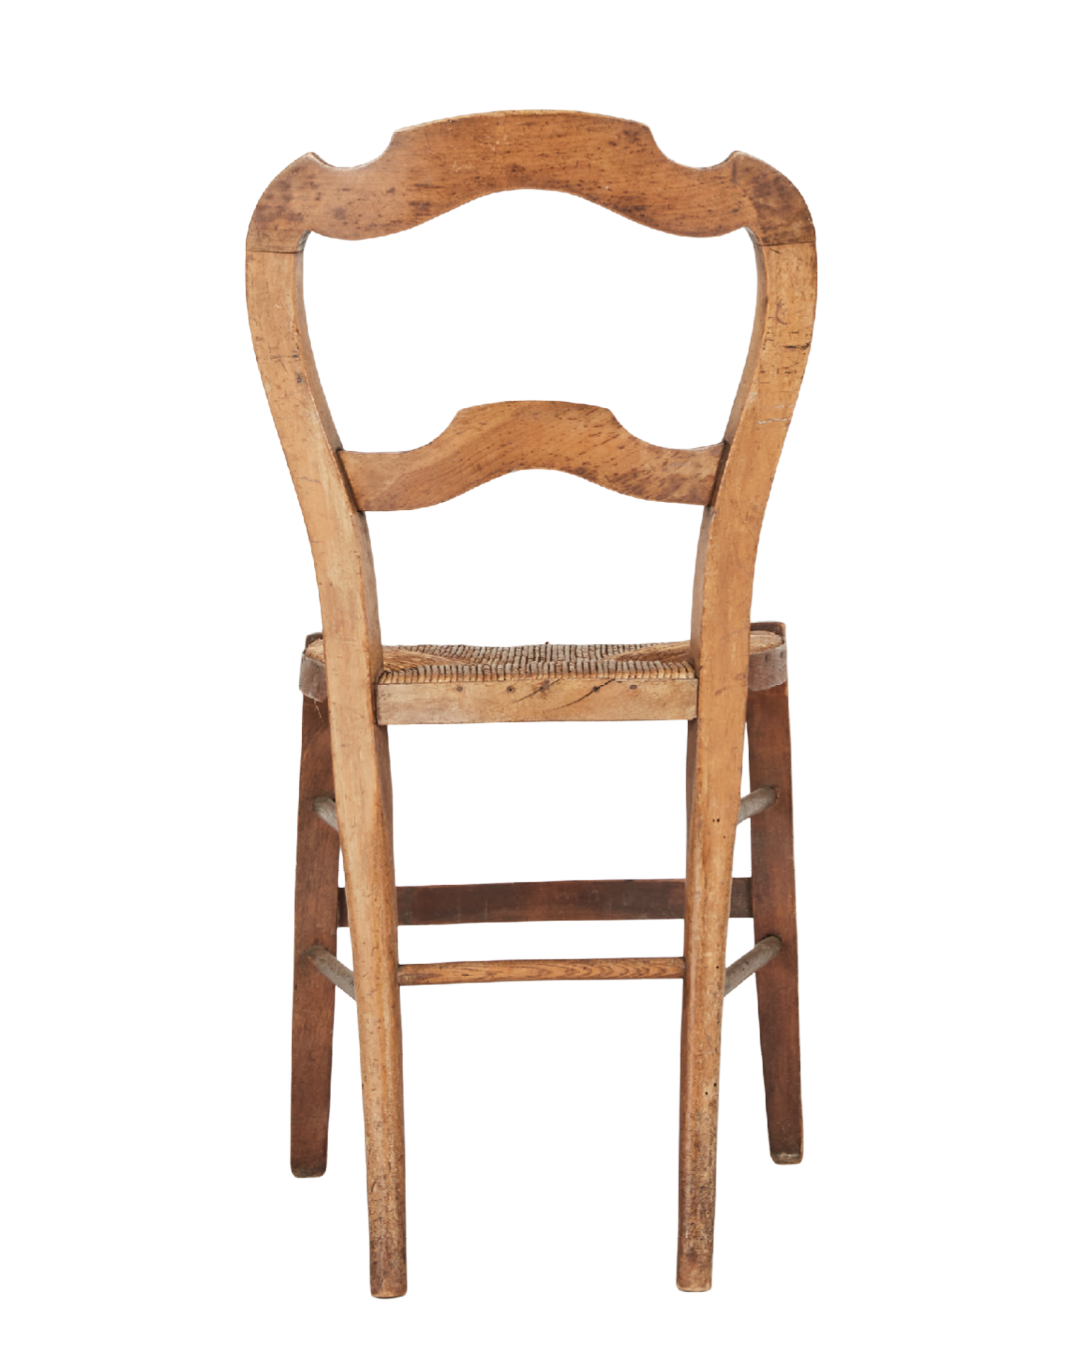 02 Vintage French Chair